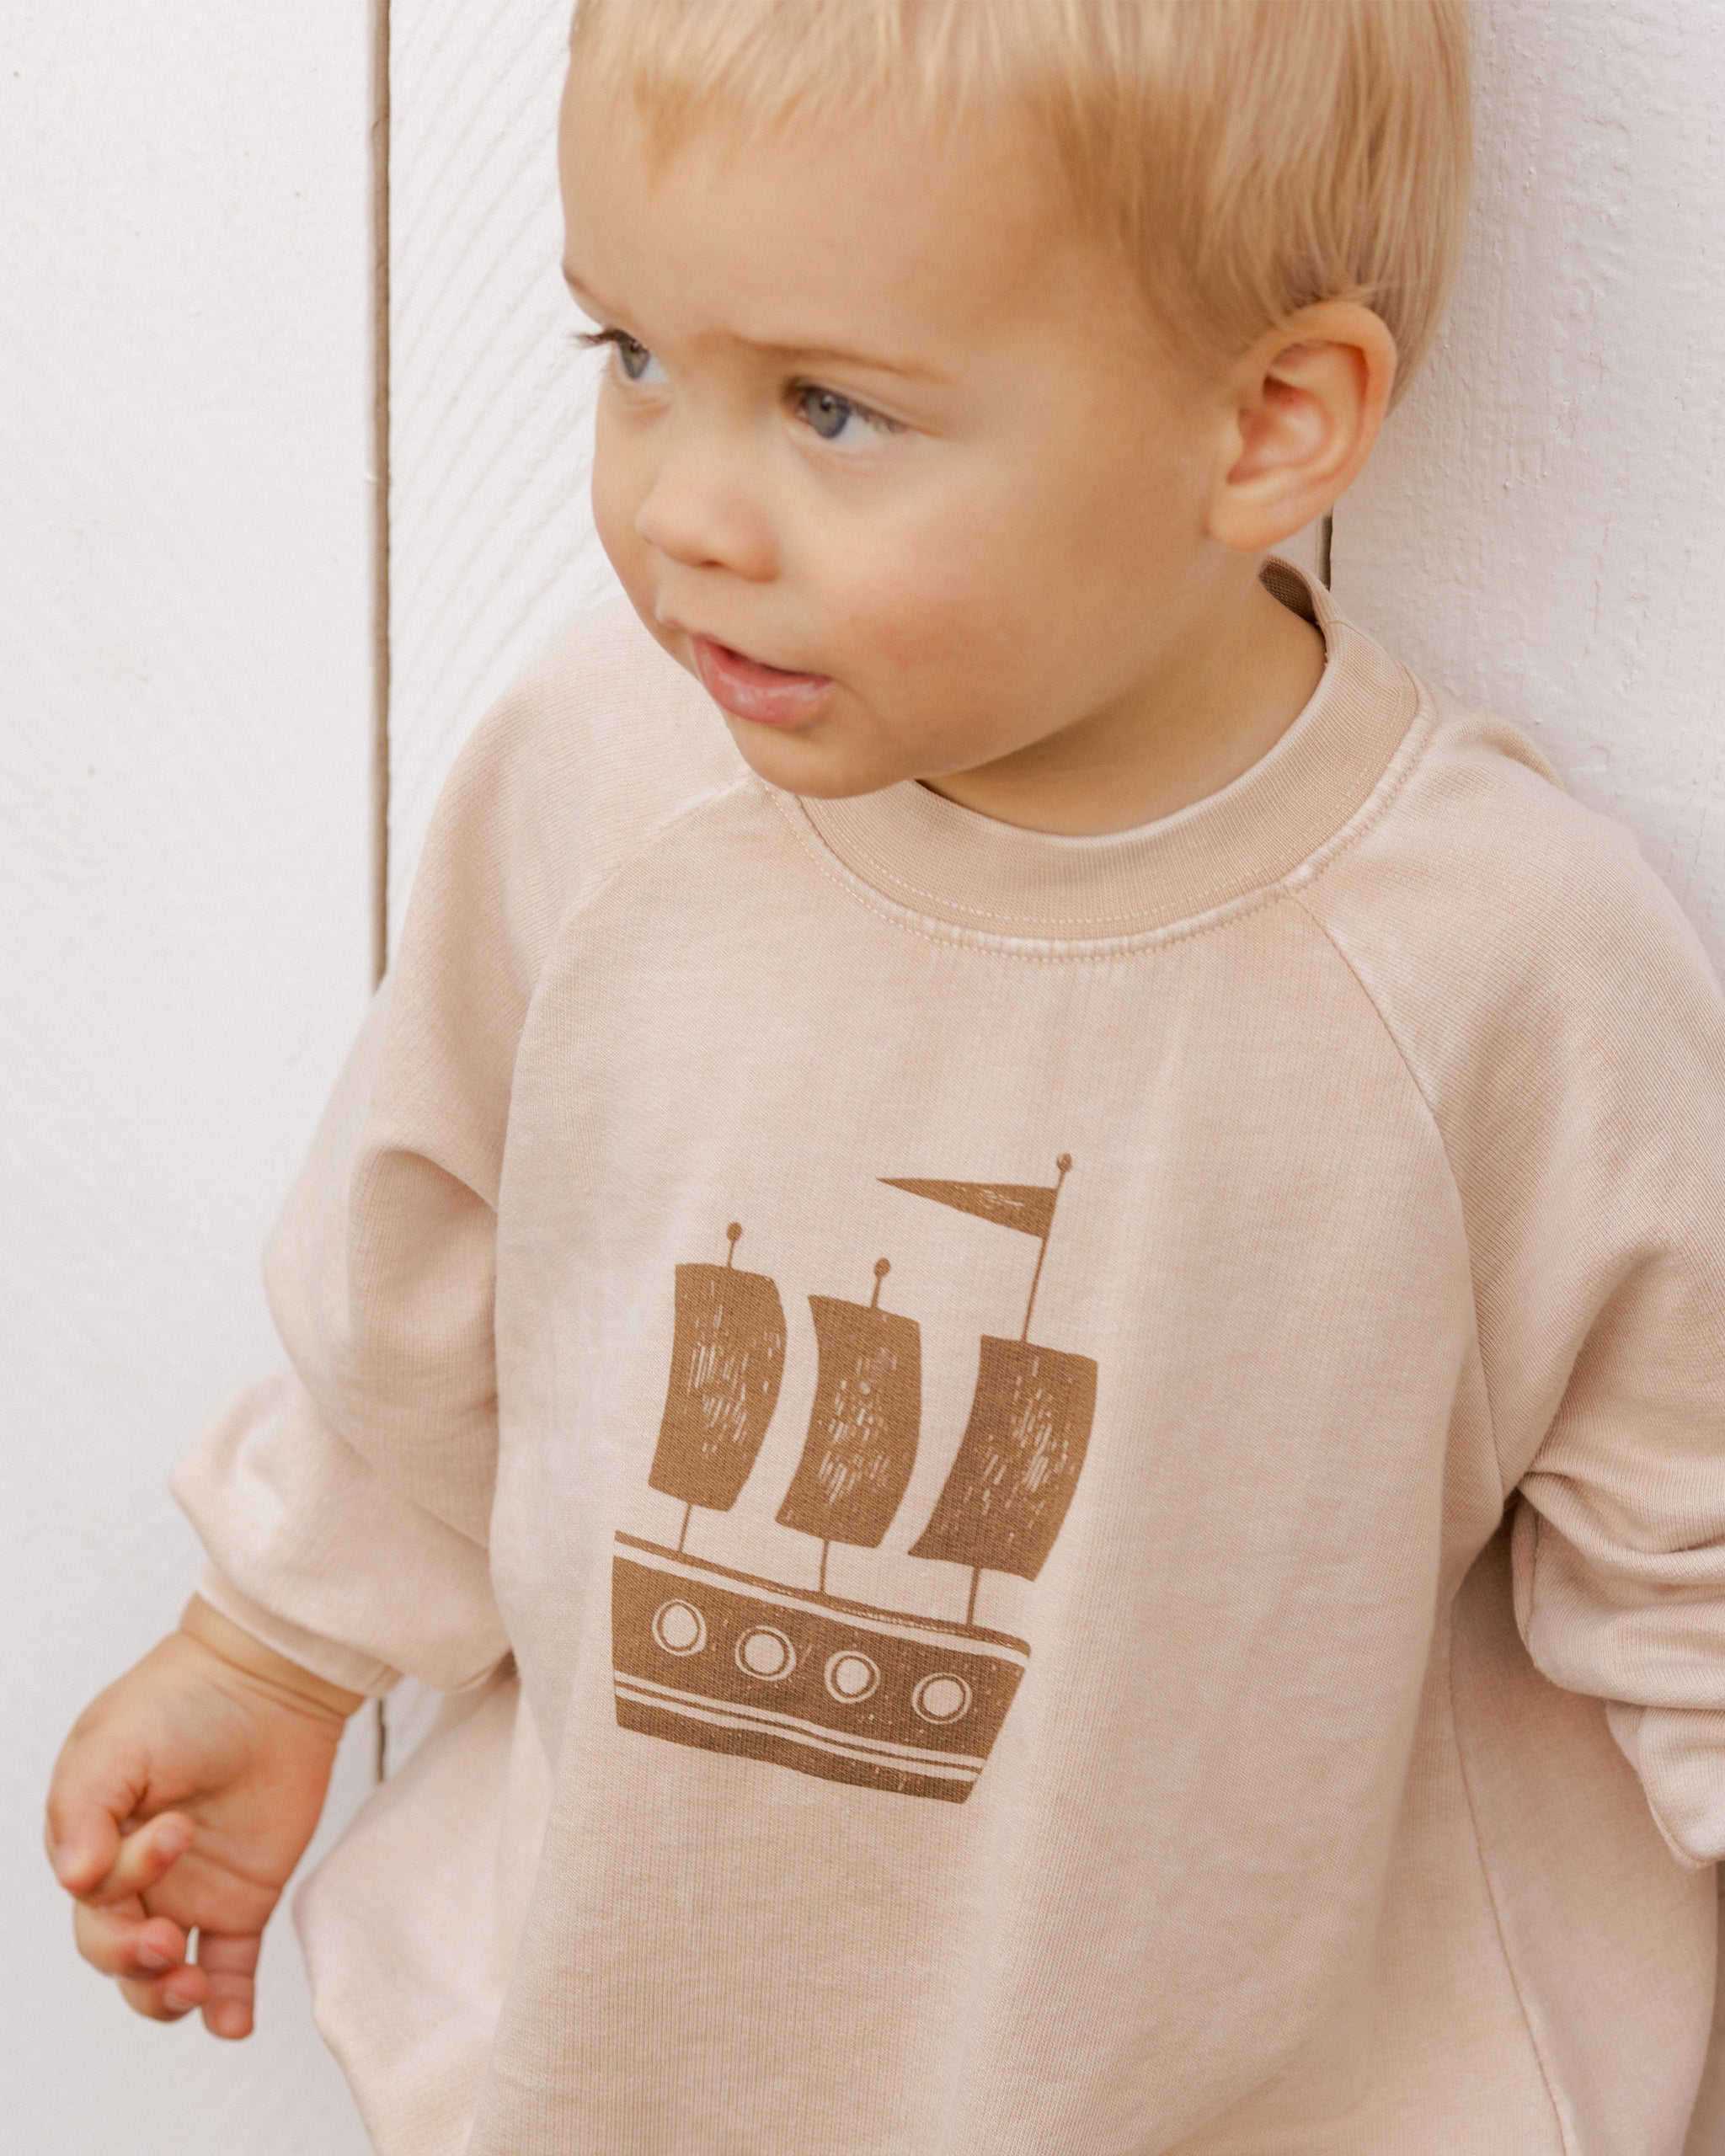 Crewneck Romper || Ship - Rylee + Cru | Kids Clothes | Trendy Baby Clothes | Modern Infant Outfits |